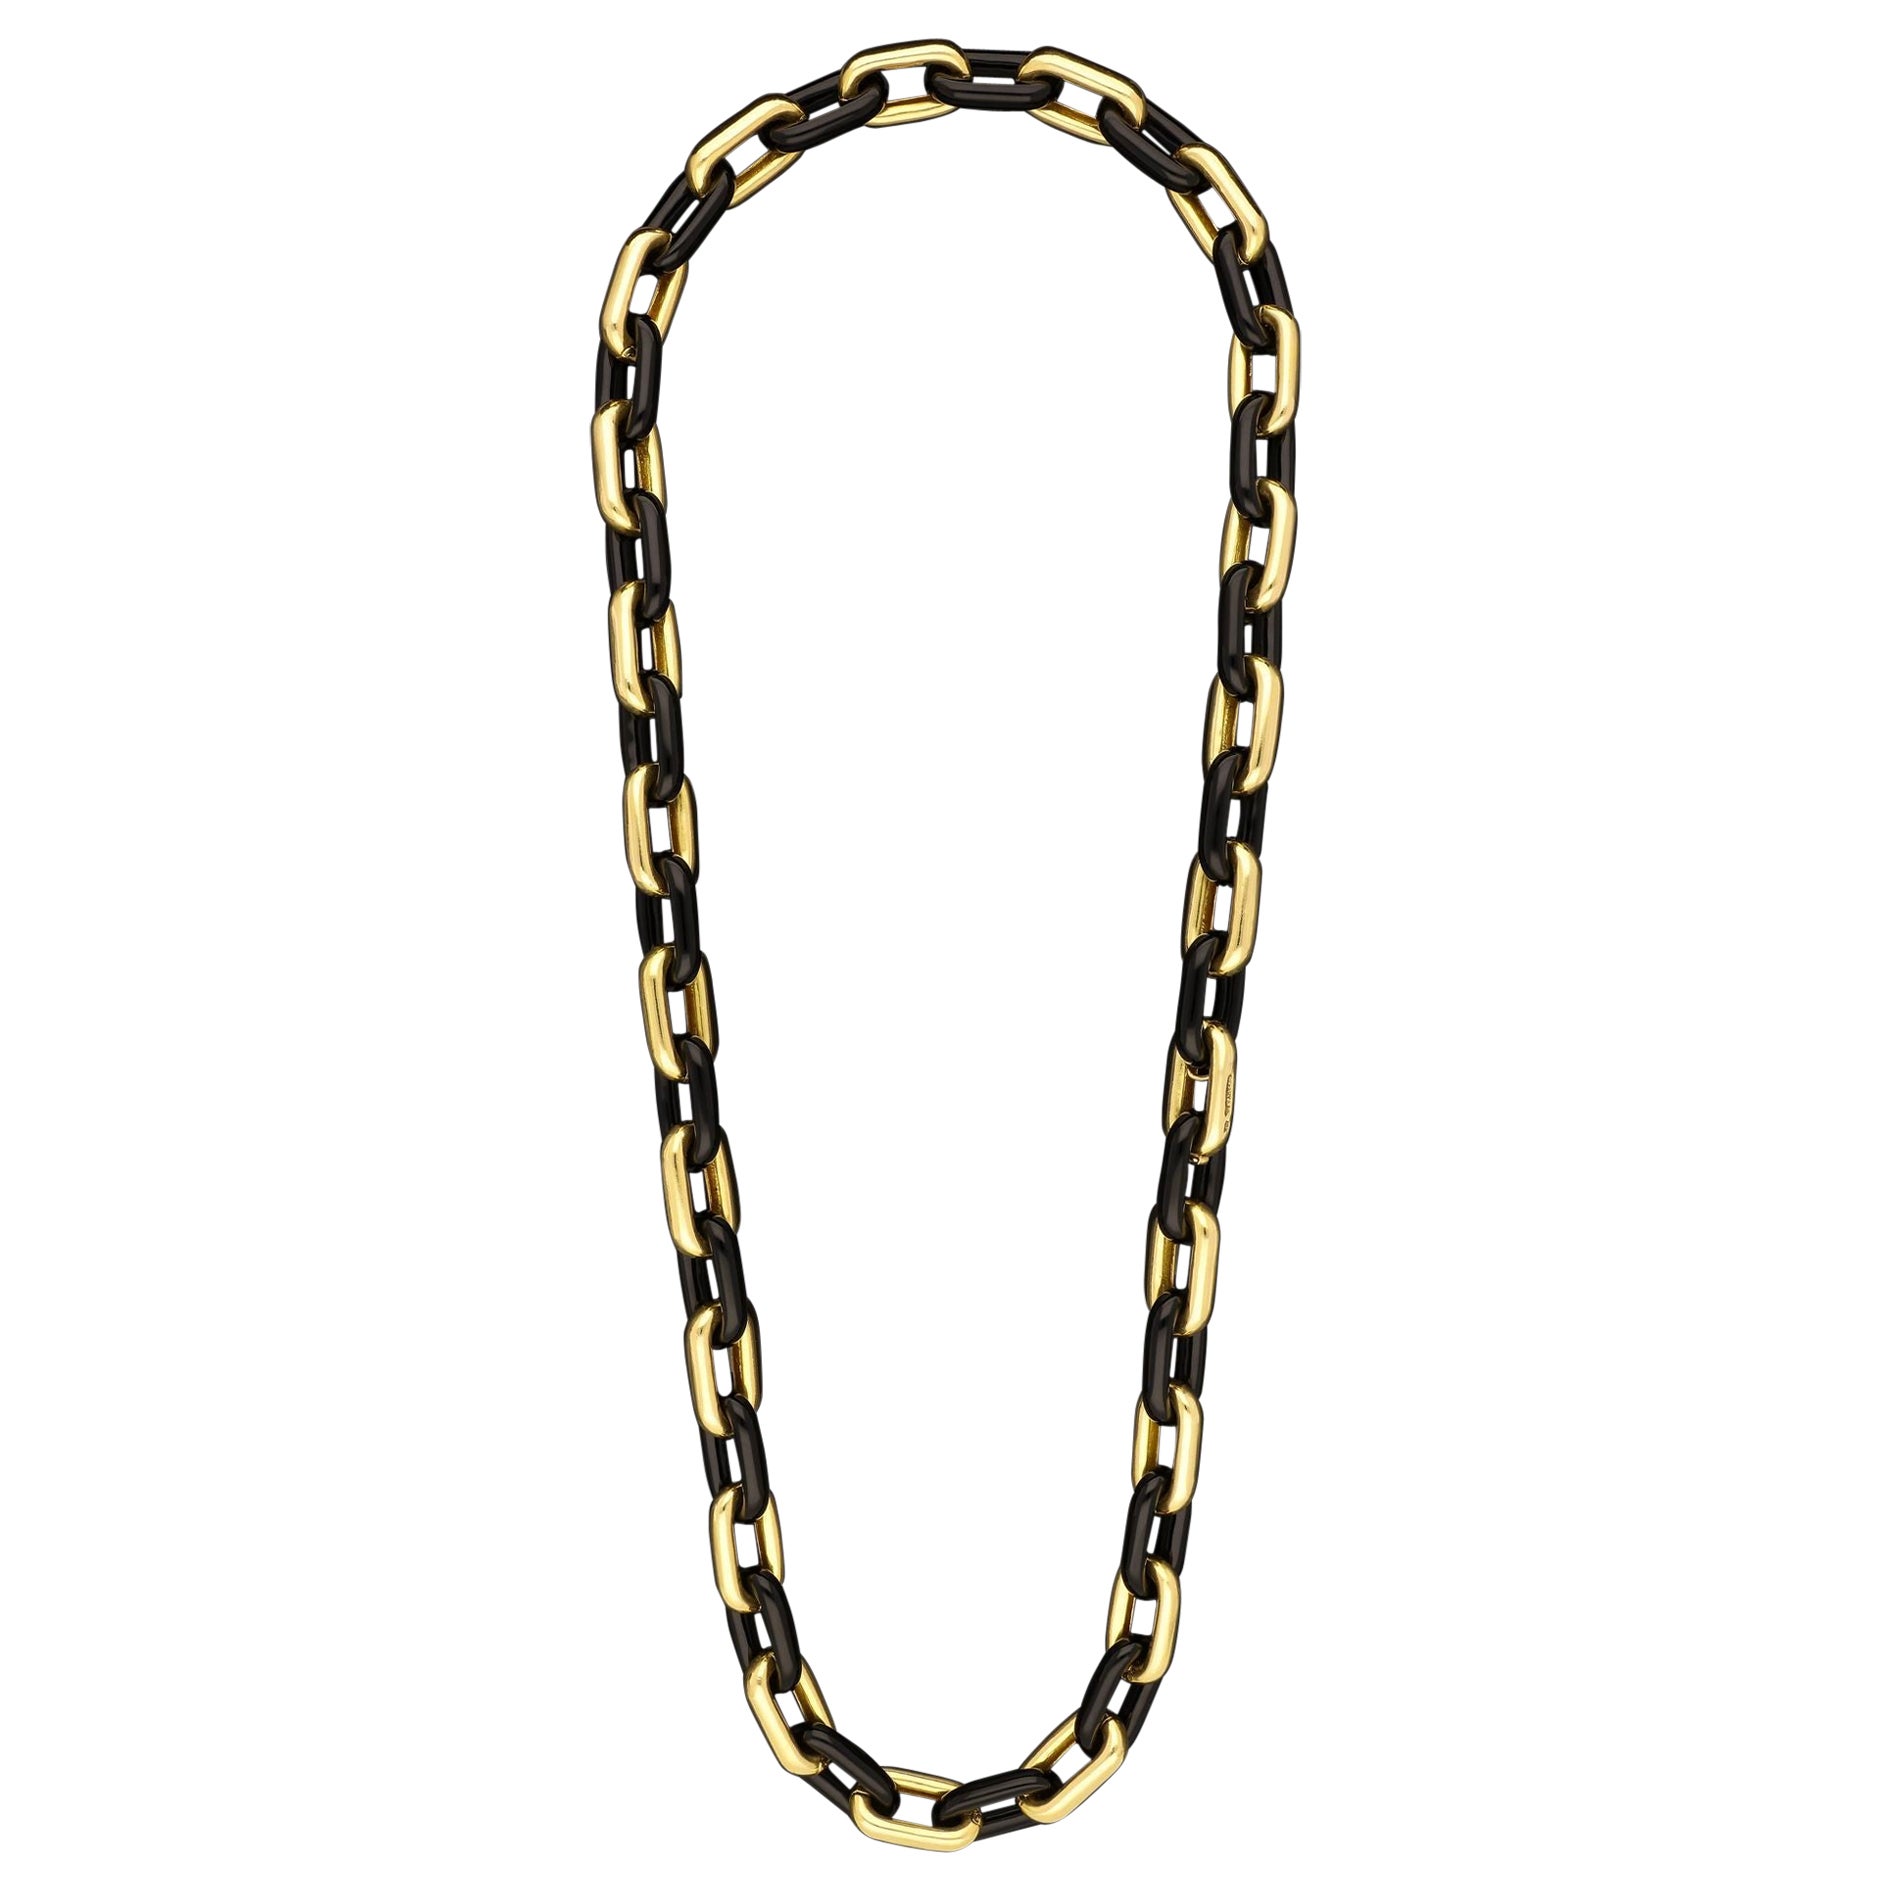 Tiffany Bold 18ct Gold and Black Onyx Long Chain Sautoir Necklace circa 1970s